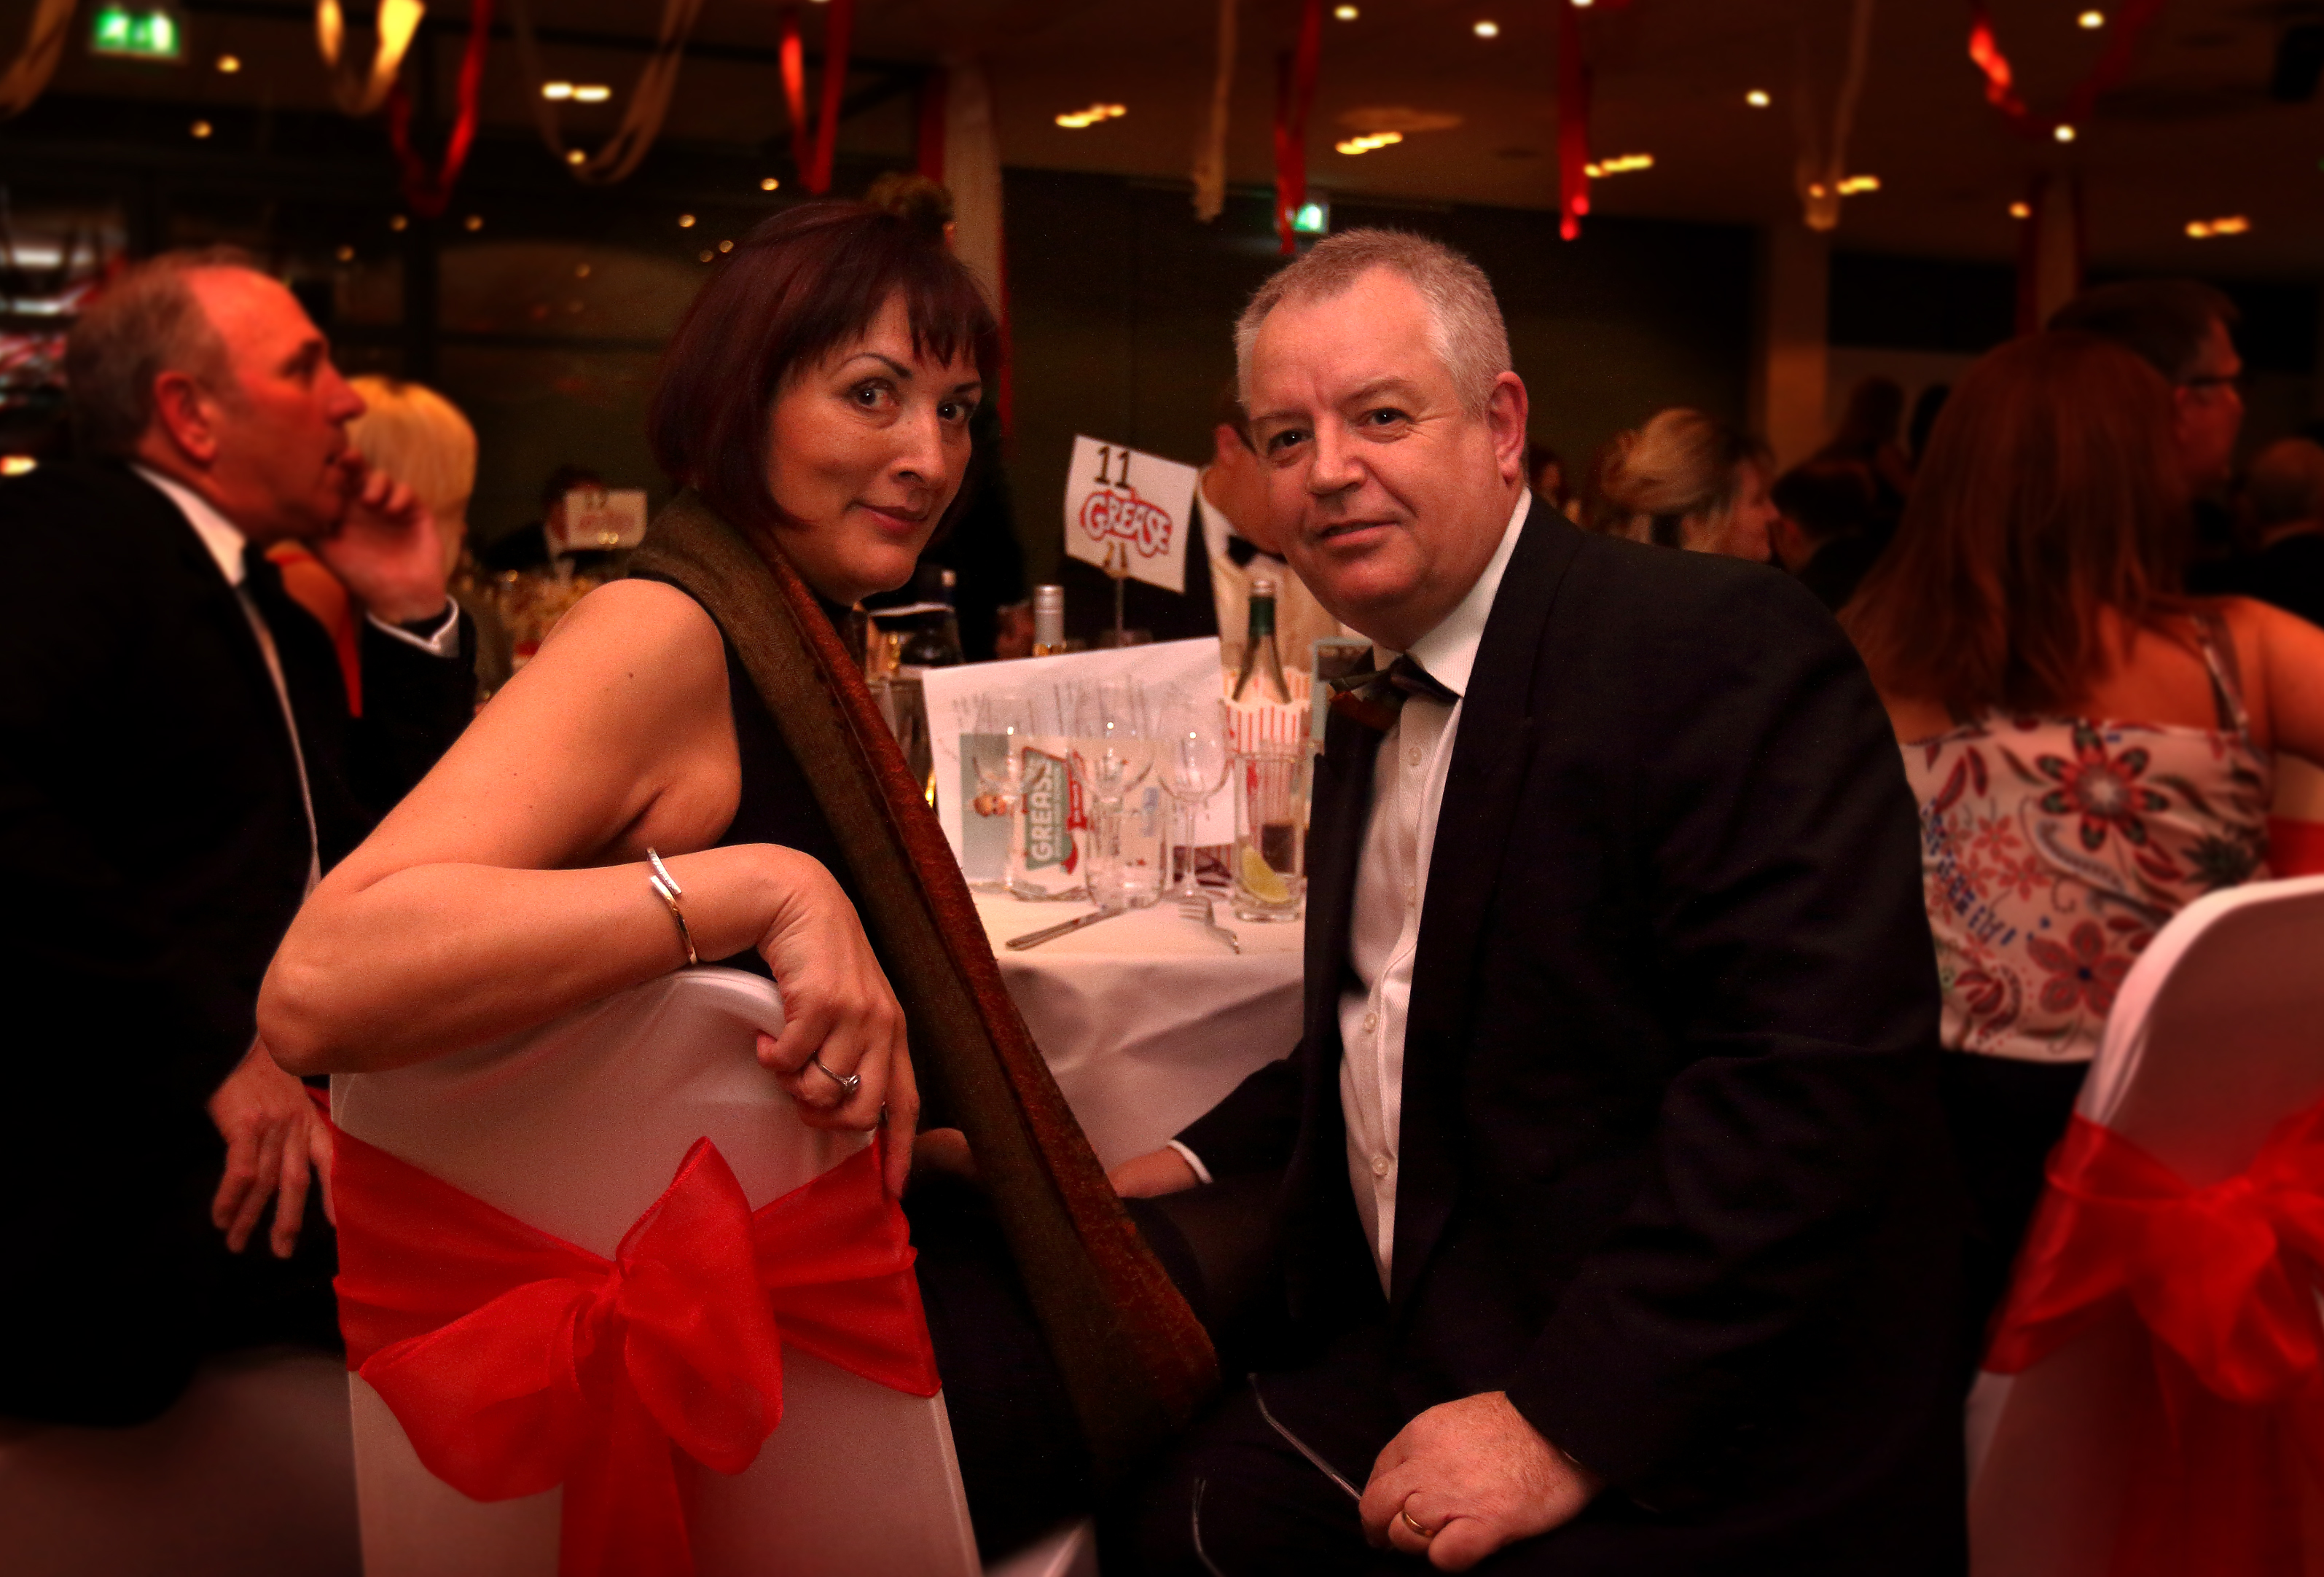 Charity ball backed by Wrexham firm raises £30,000